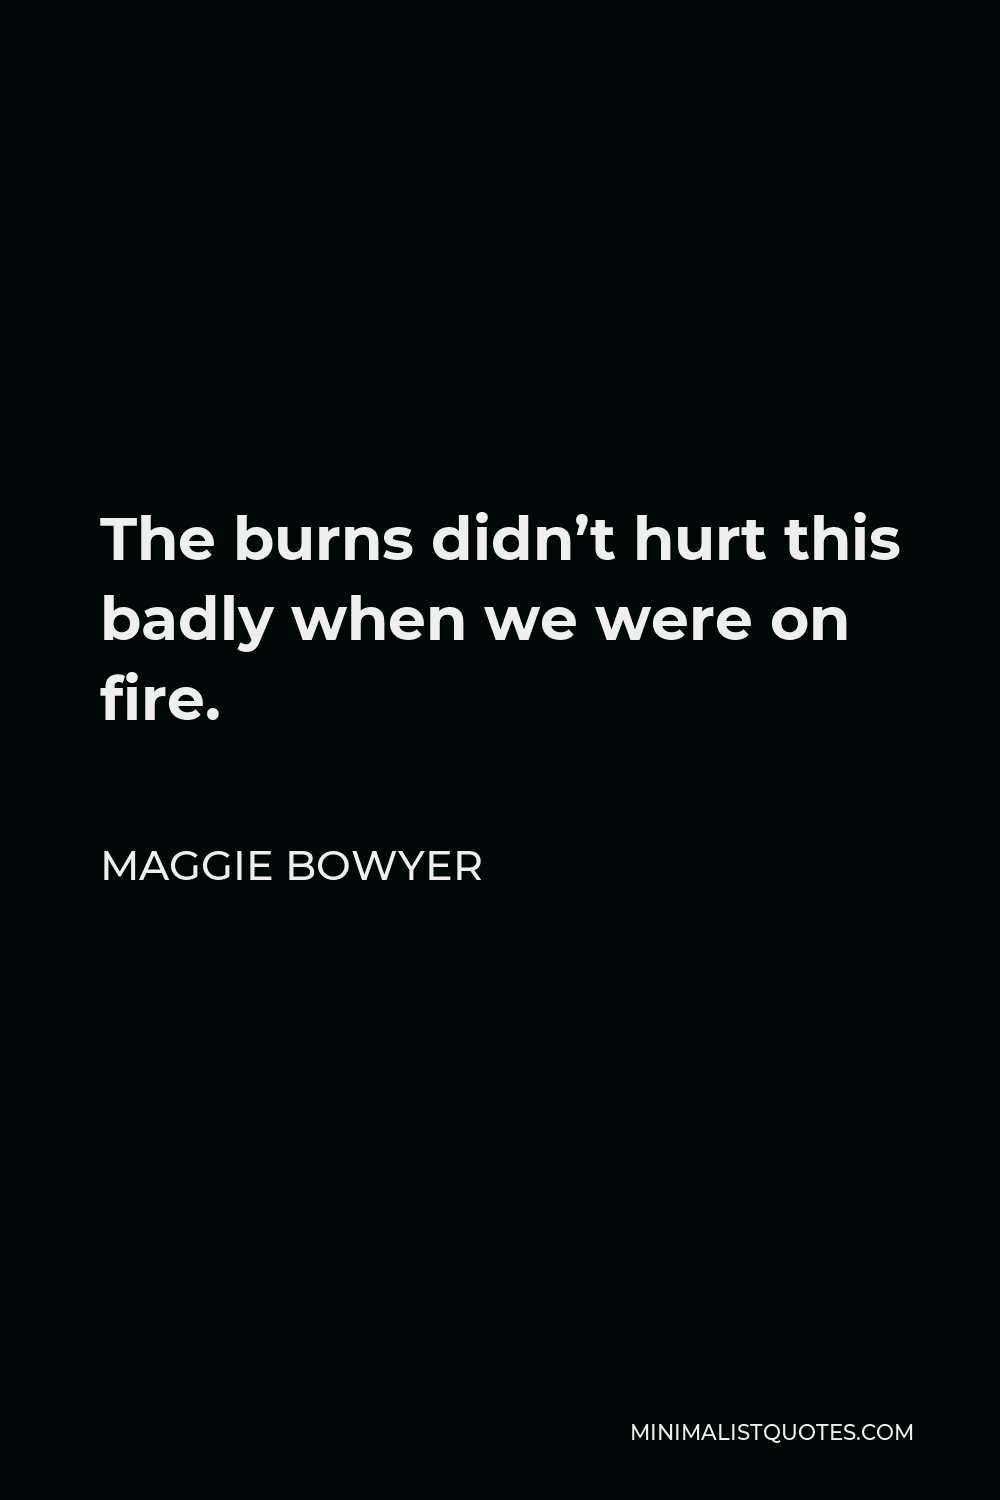 Maggie Bowyer Quote - The burns didn’t hurt this badly when we were on fire.